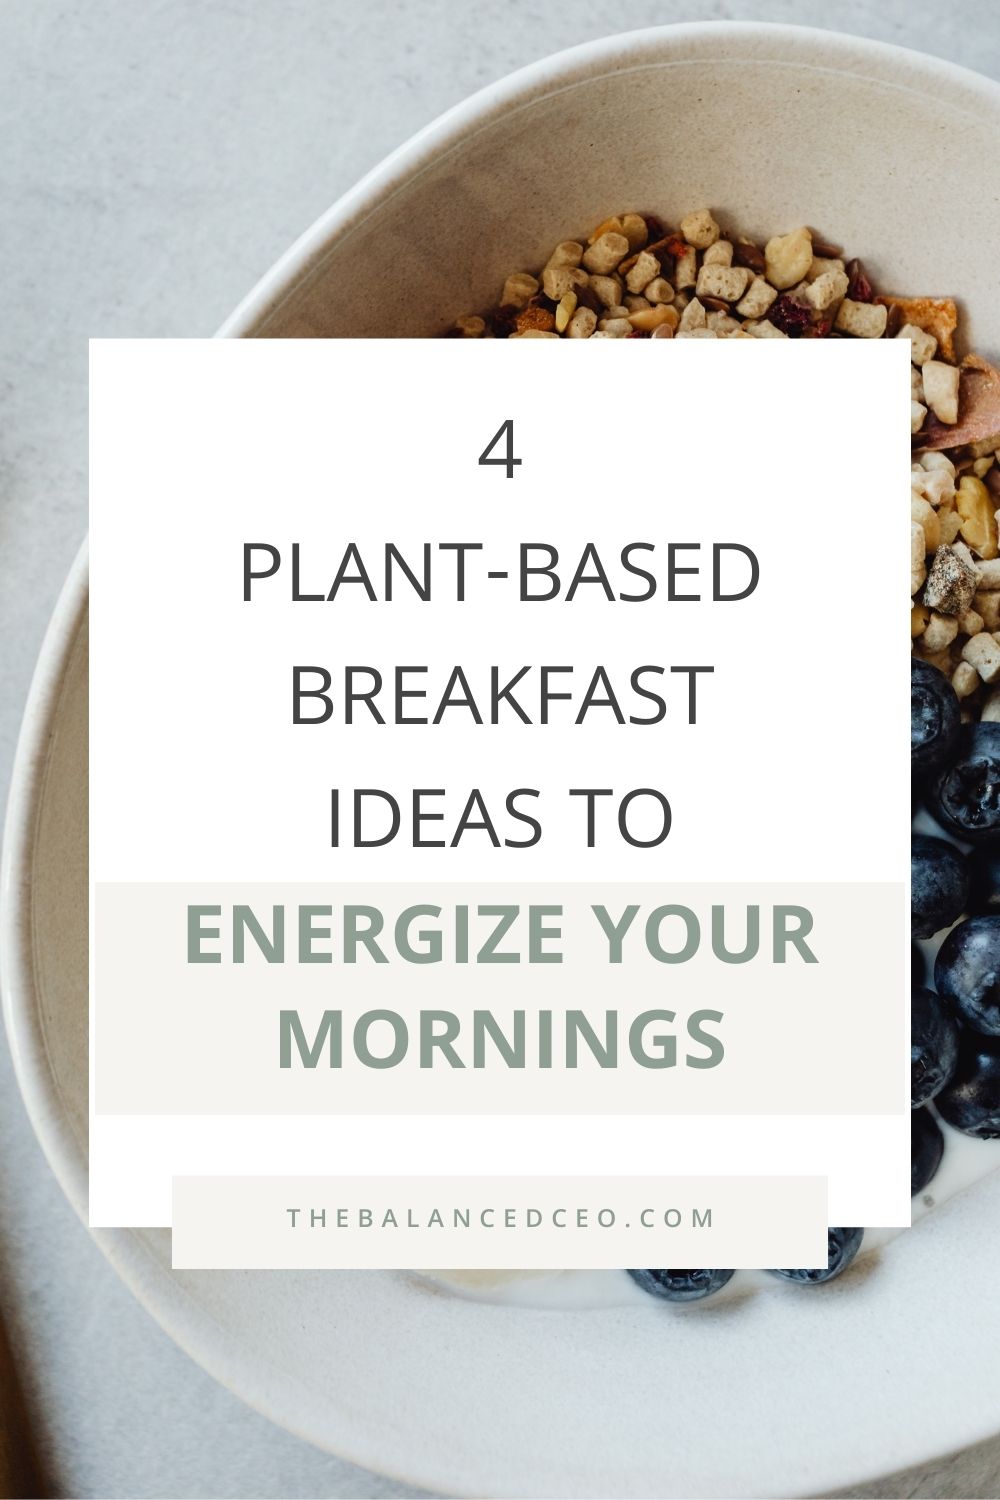 4 Plant-Based Breakfast Ideas to Energize Your Mornings